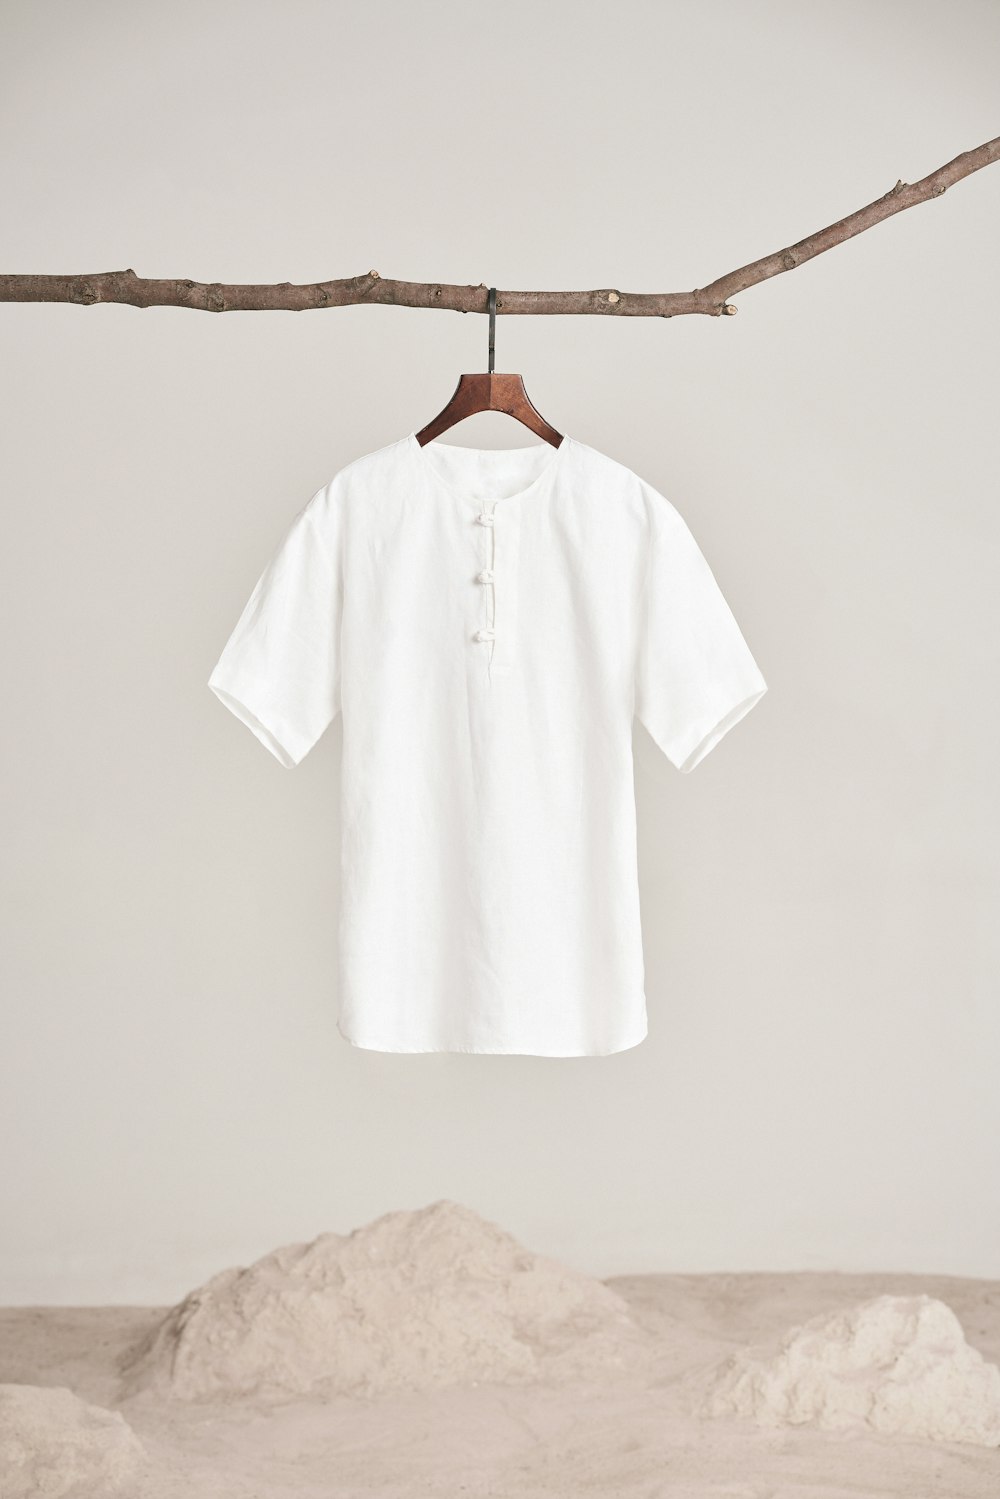 a white shirt hanging on a clothes line